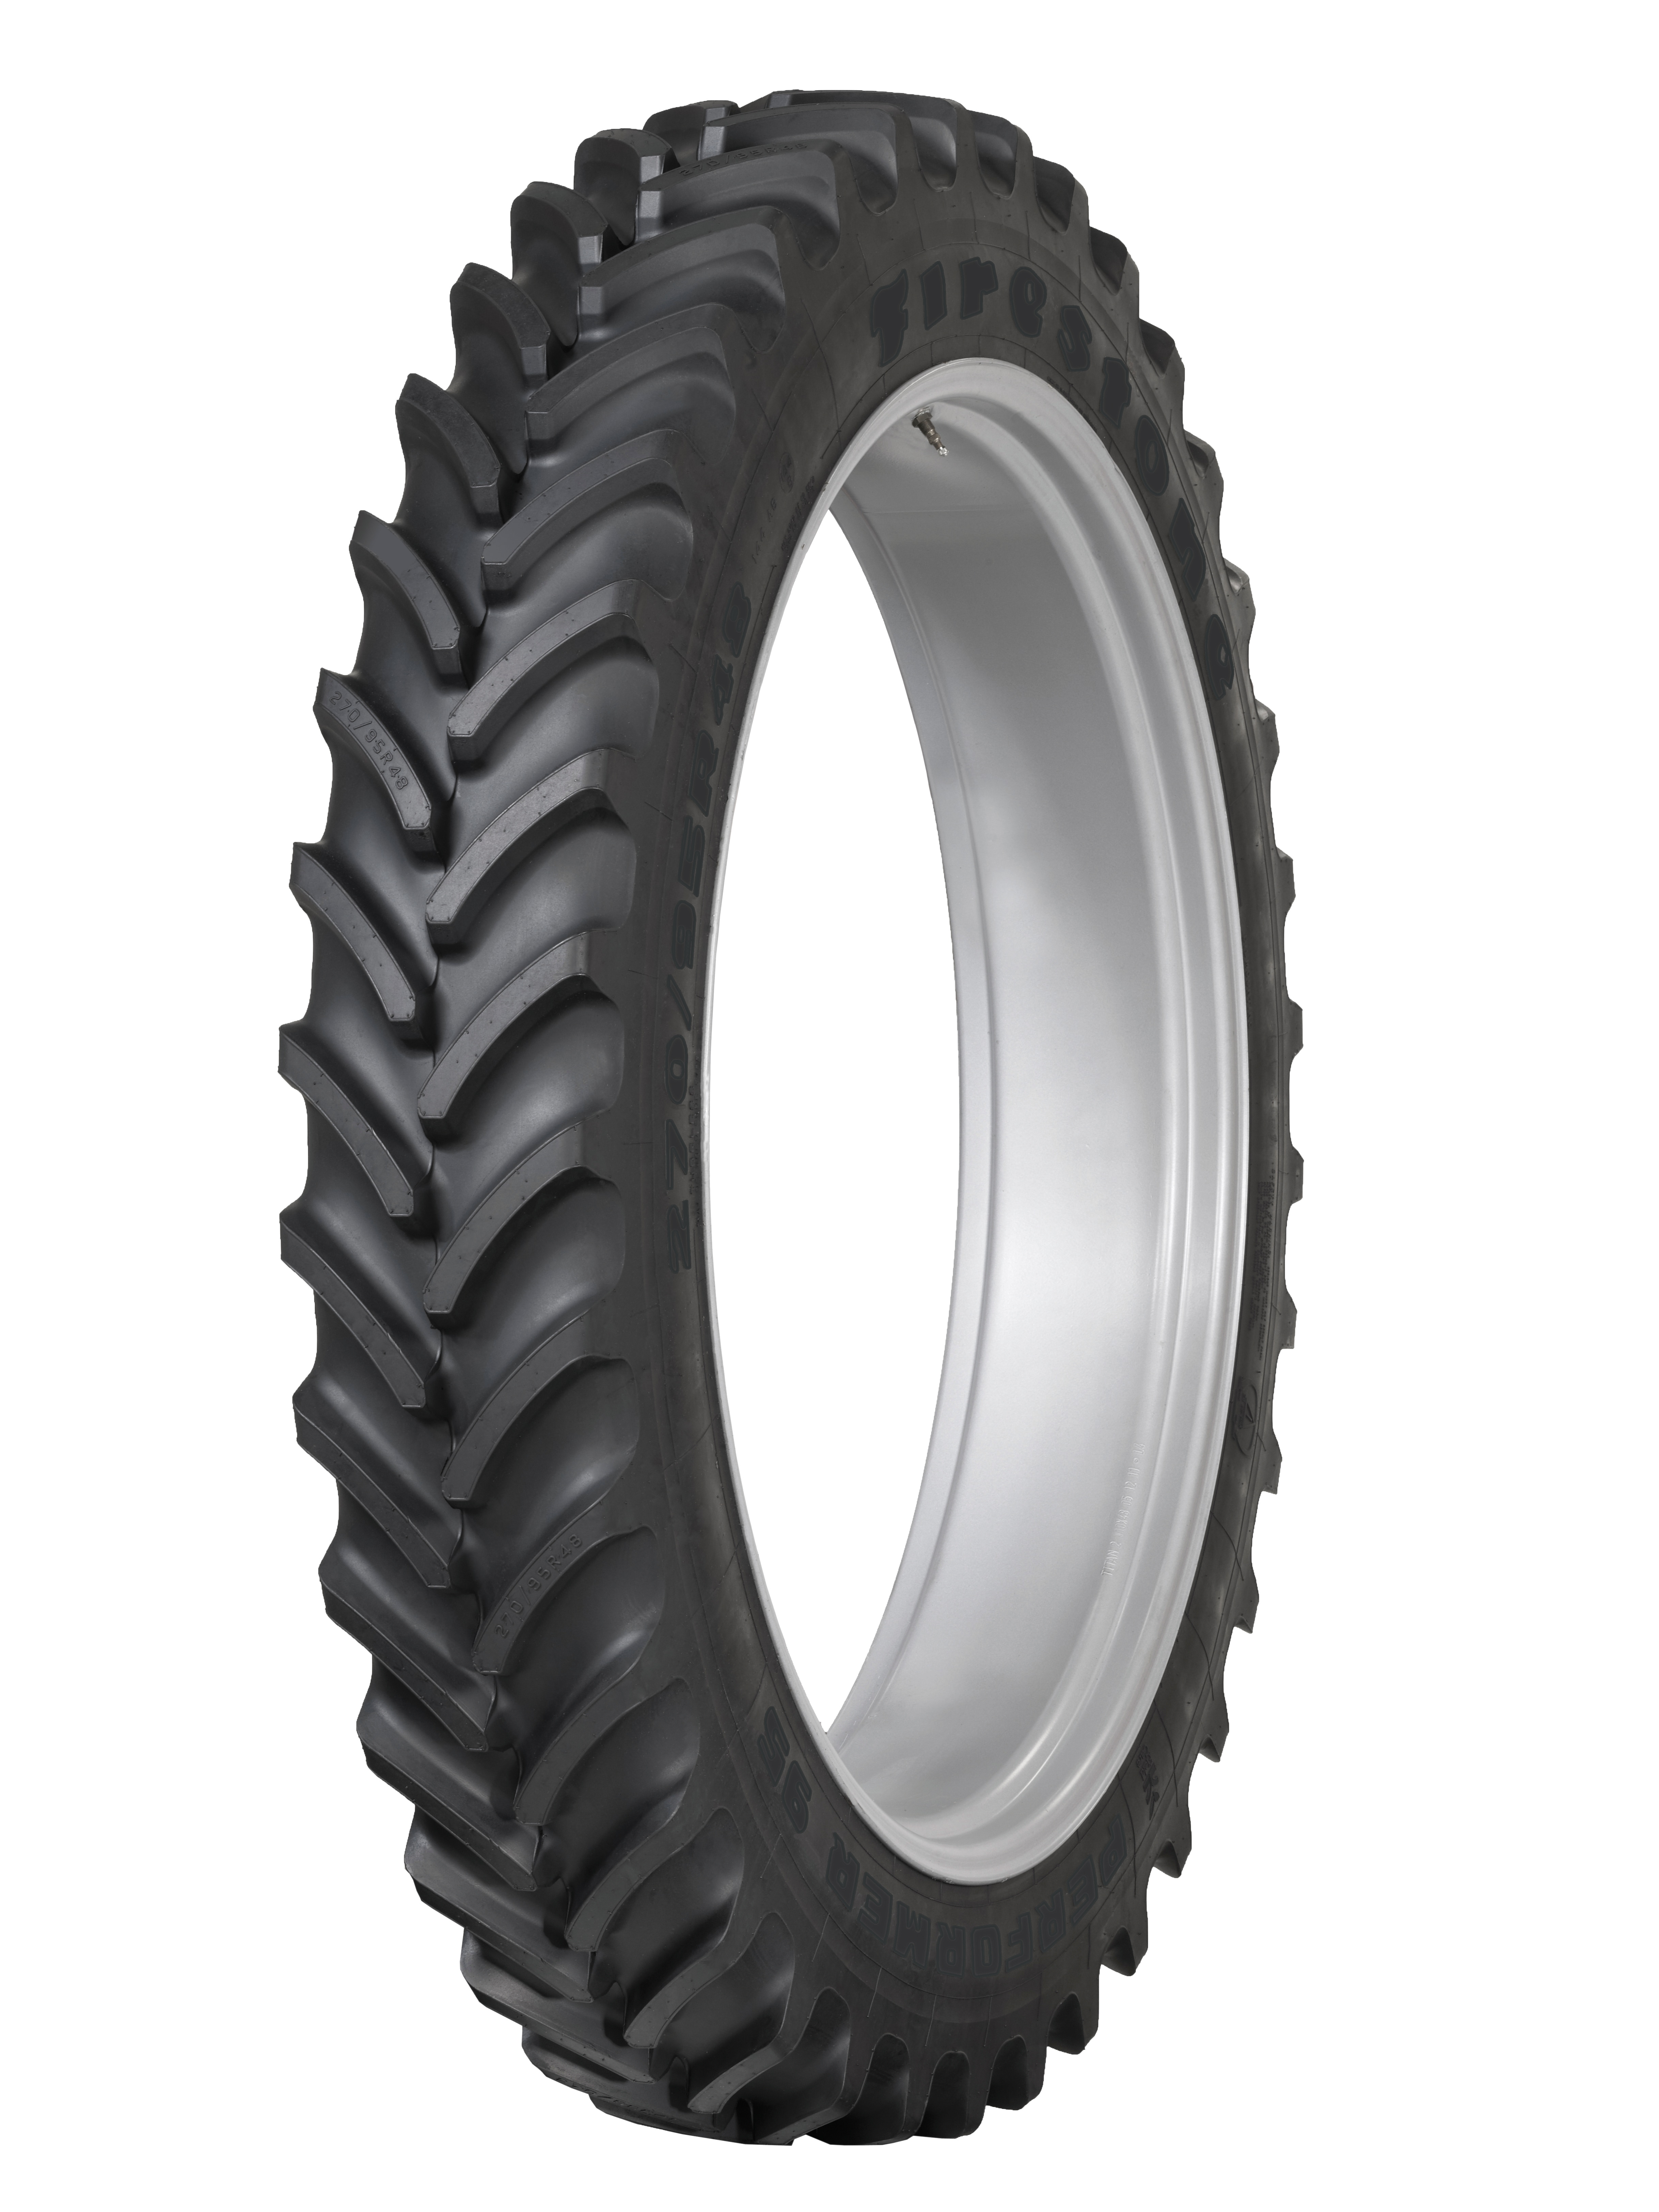 AG Tire Selector - Find Tractor, Ag and Farm Tires - Firestone